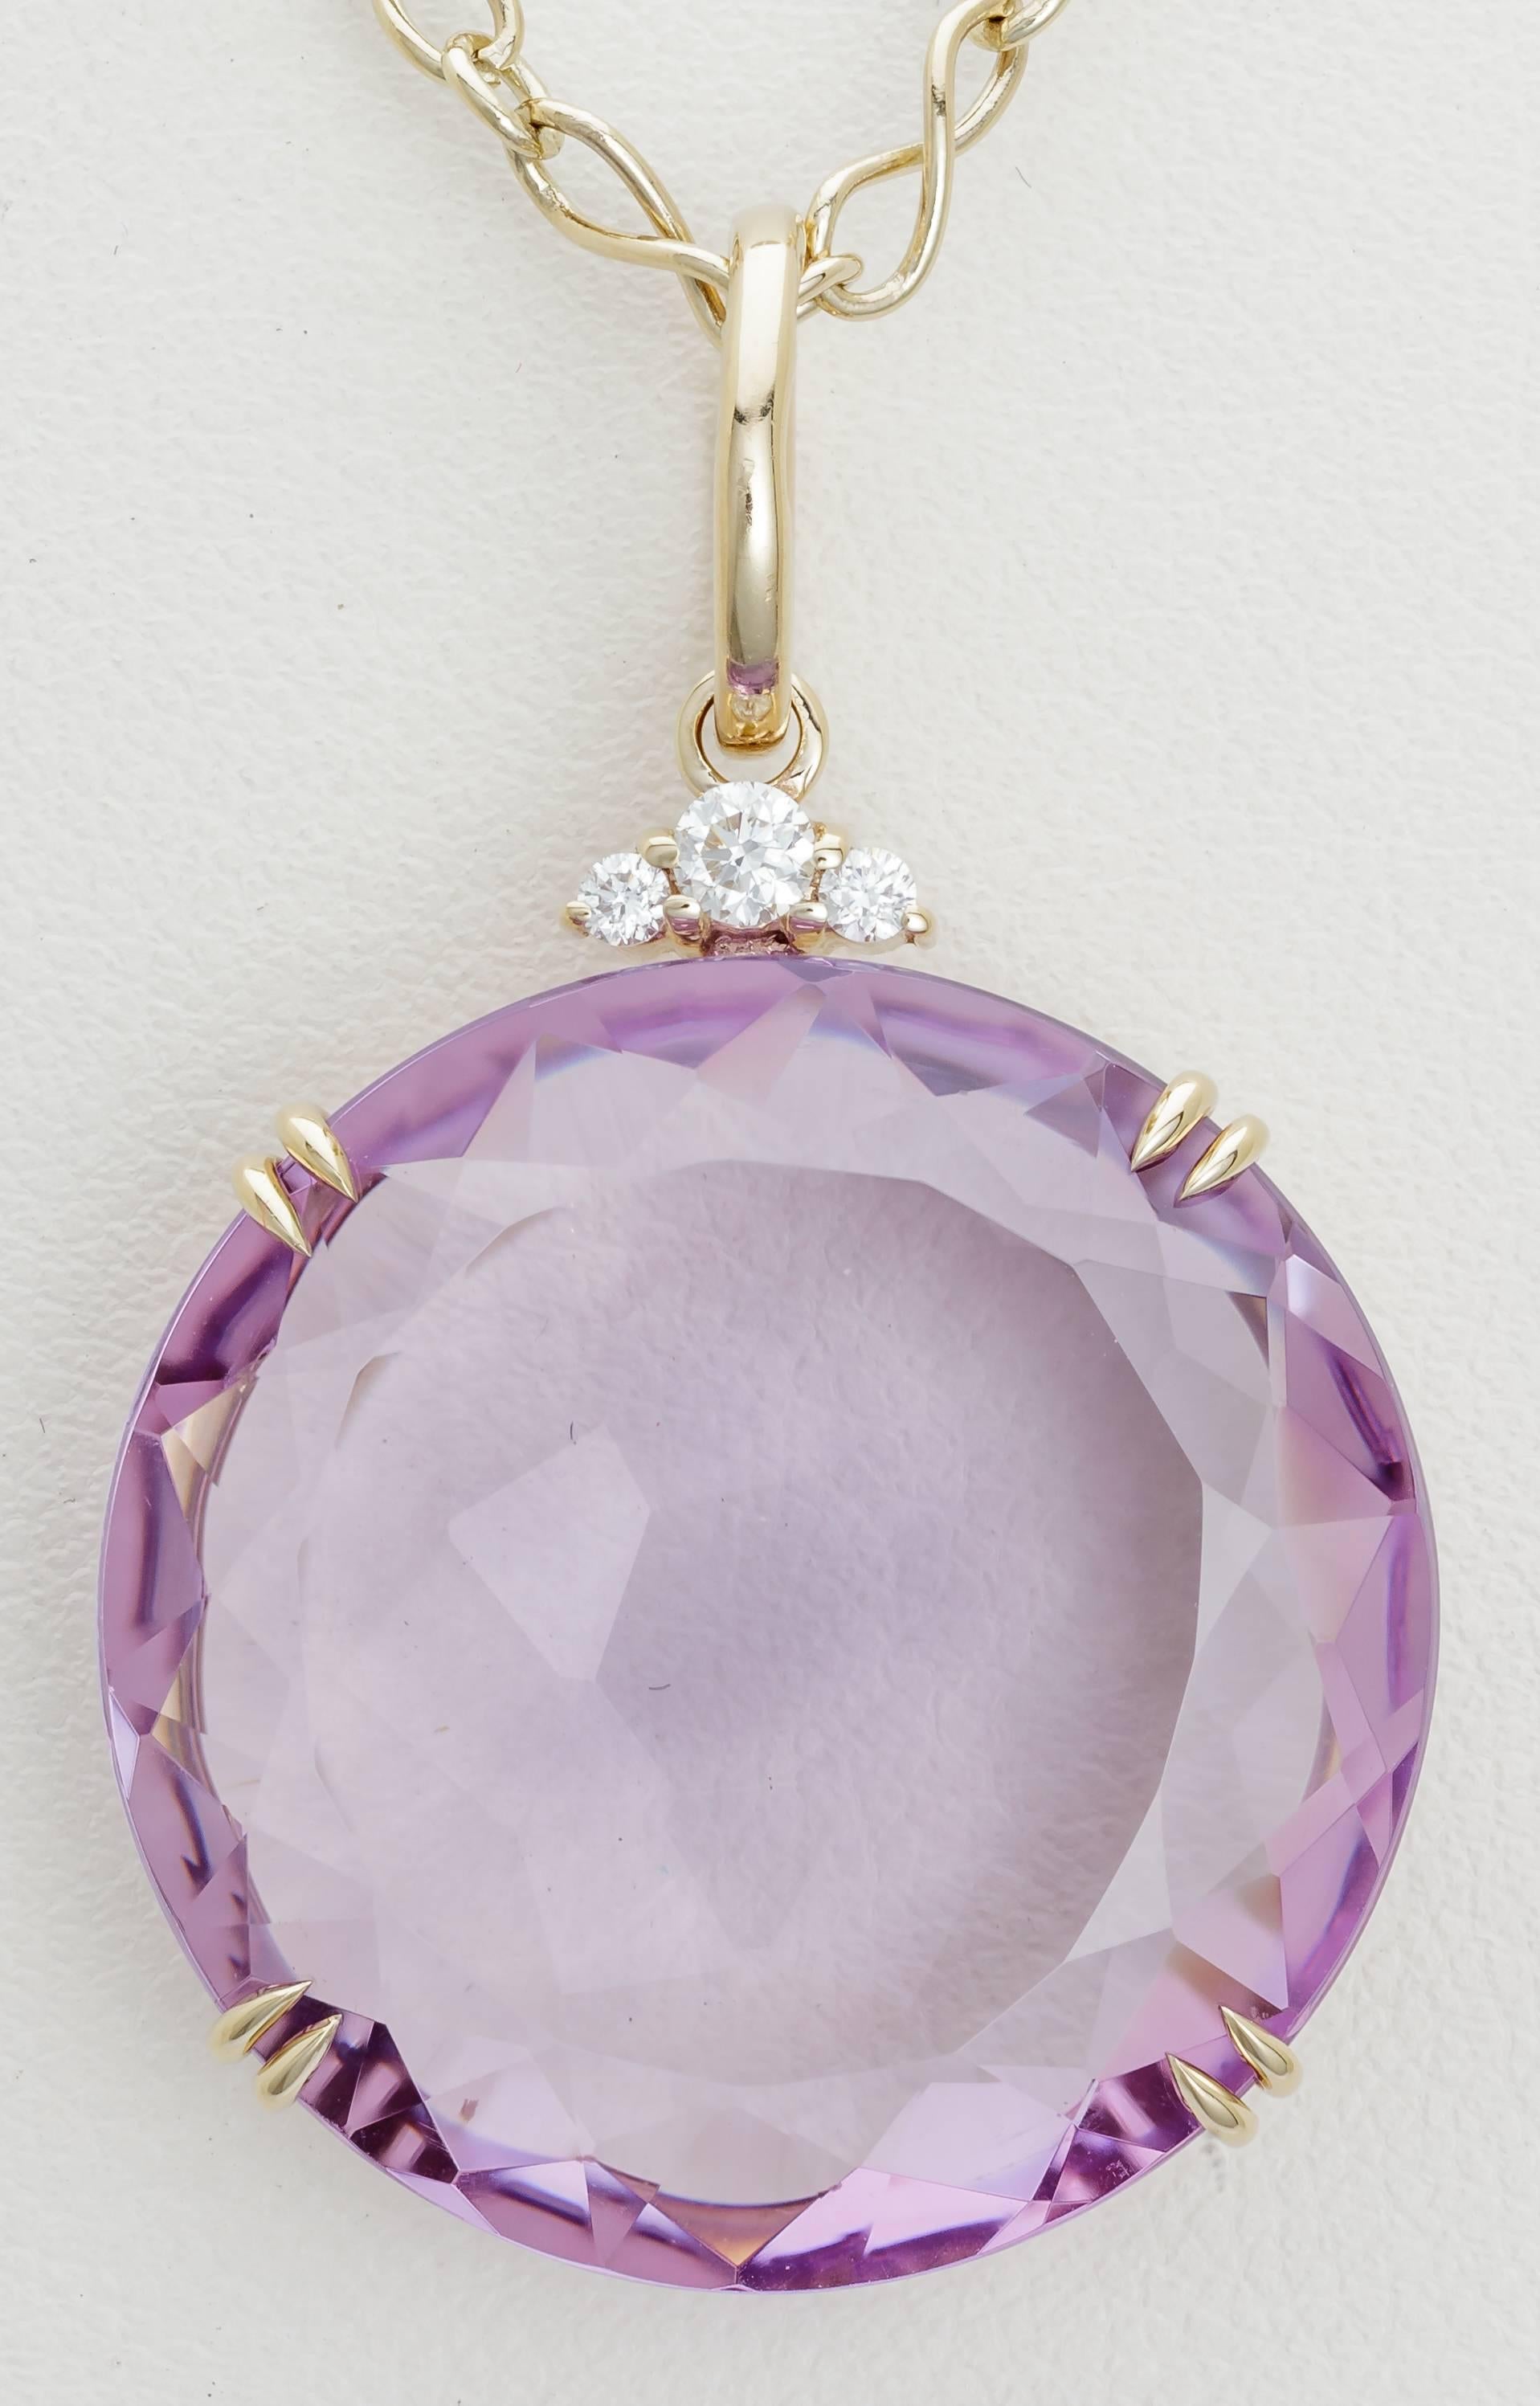 This new H. Stern necklace features a pendant from their Cobblestone collection on an 18k noble gold chain.  The pendant has a 27.00ct amethyst set in noble gold with diamonds totaling .09ct.  Noble gold, H. Stern's exclusive gold alloy, is between